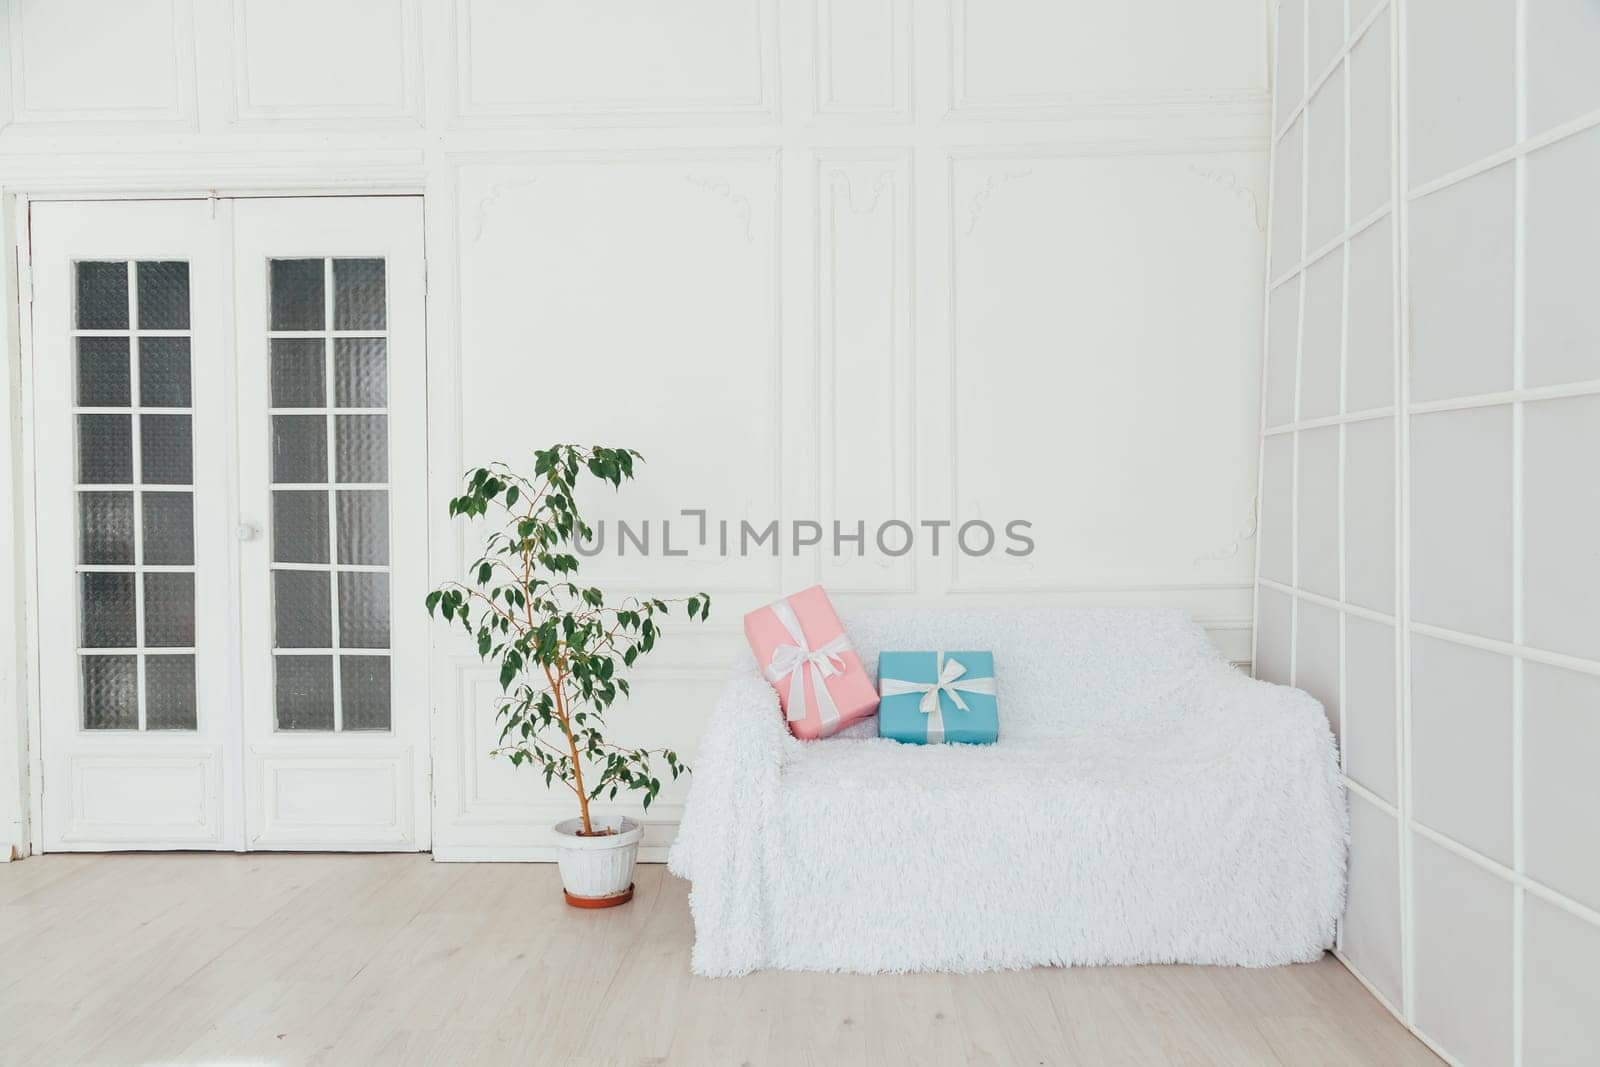 sofa with gifts in the interior of the white room